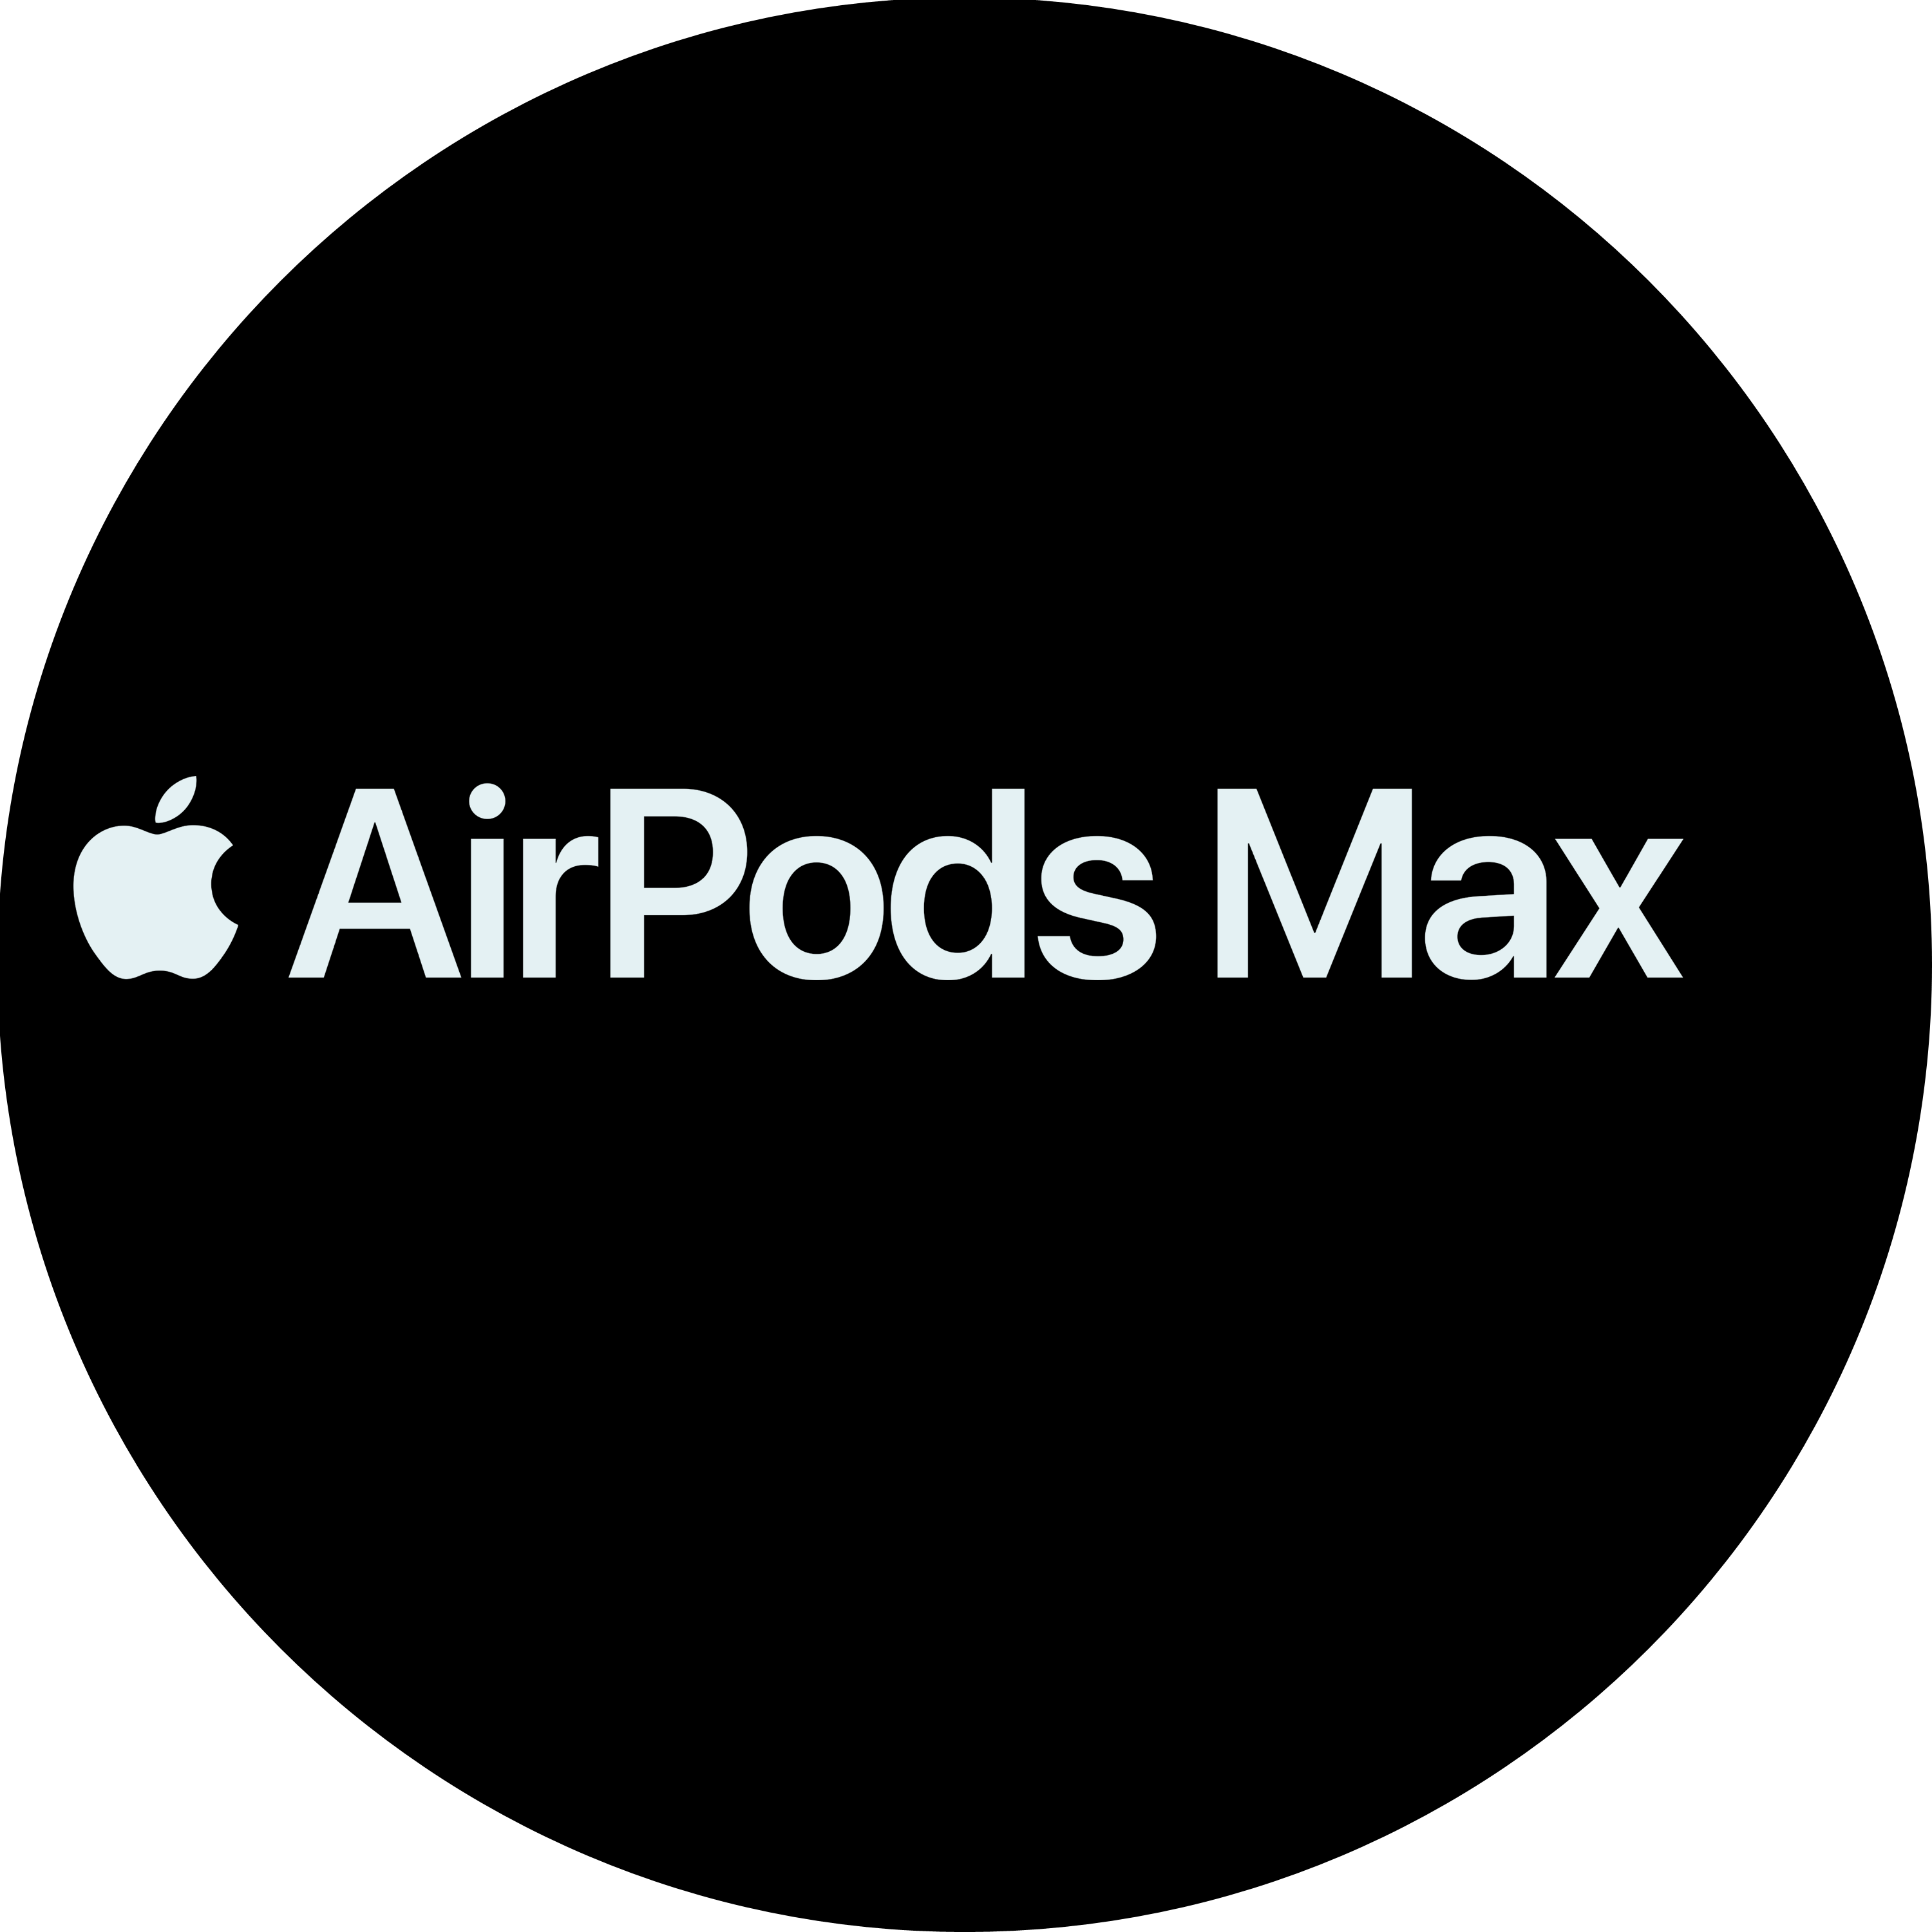 Airpods Max Logo Transparent Gallery